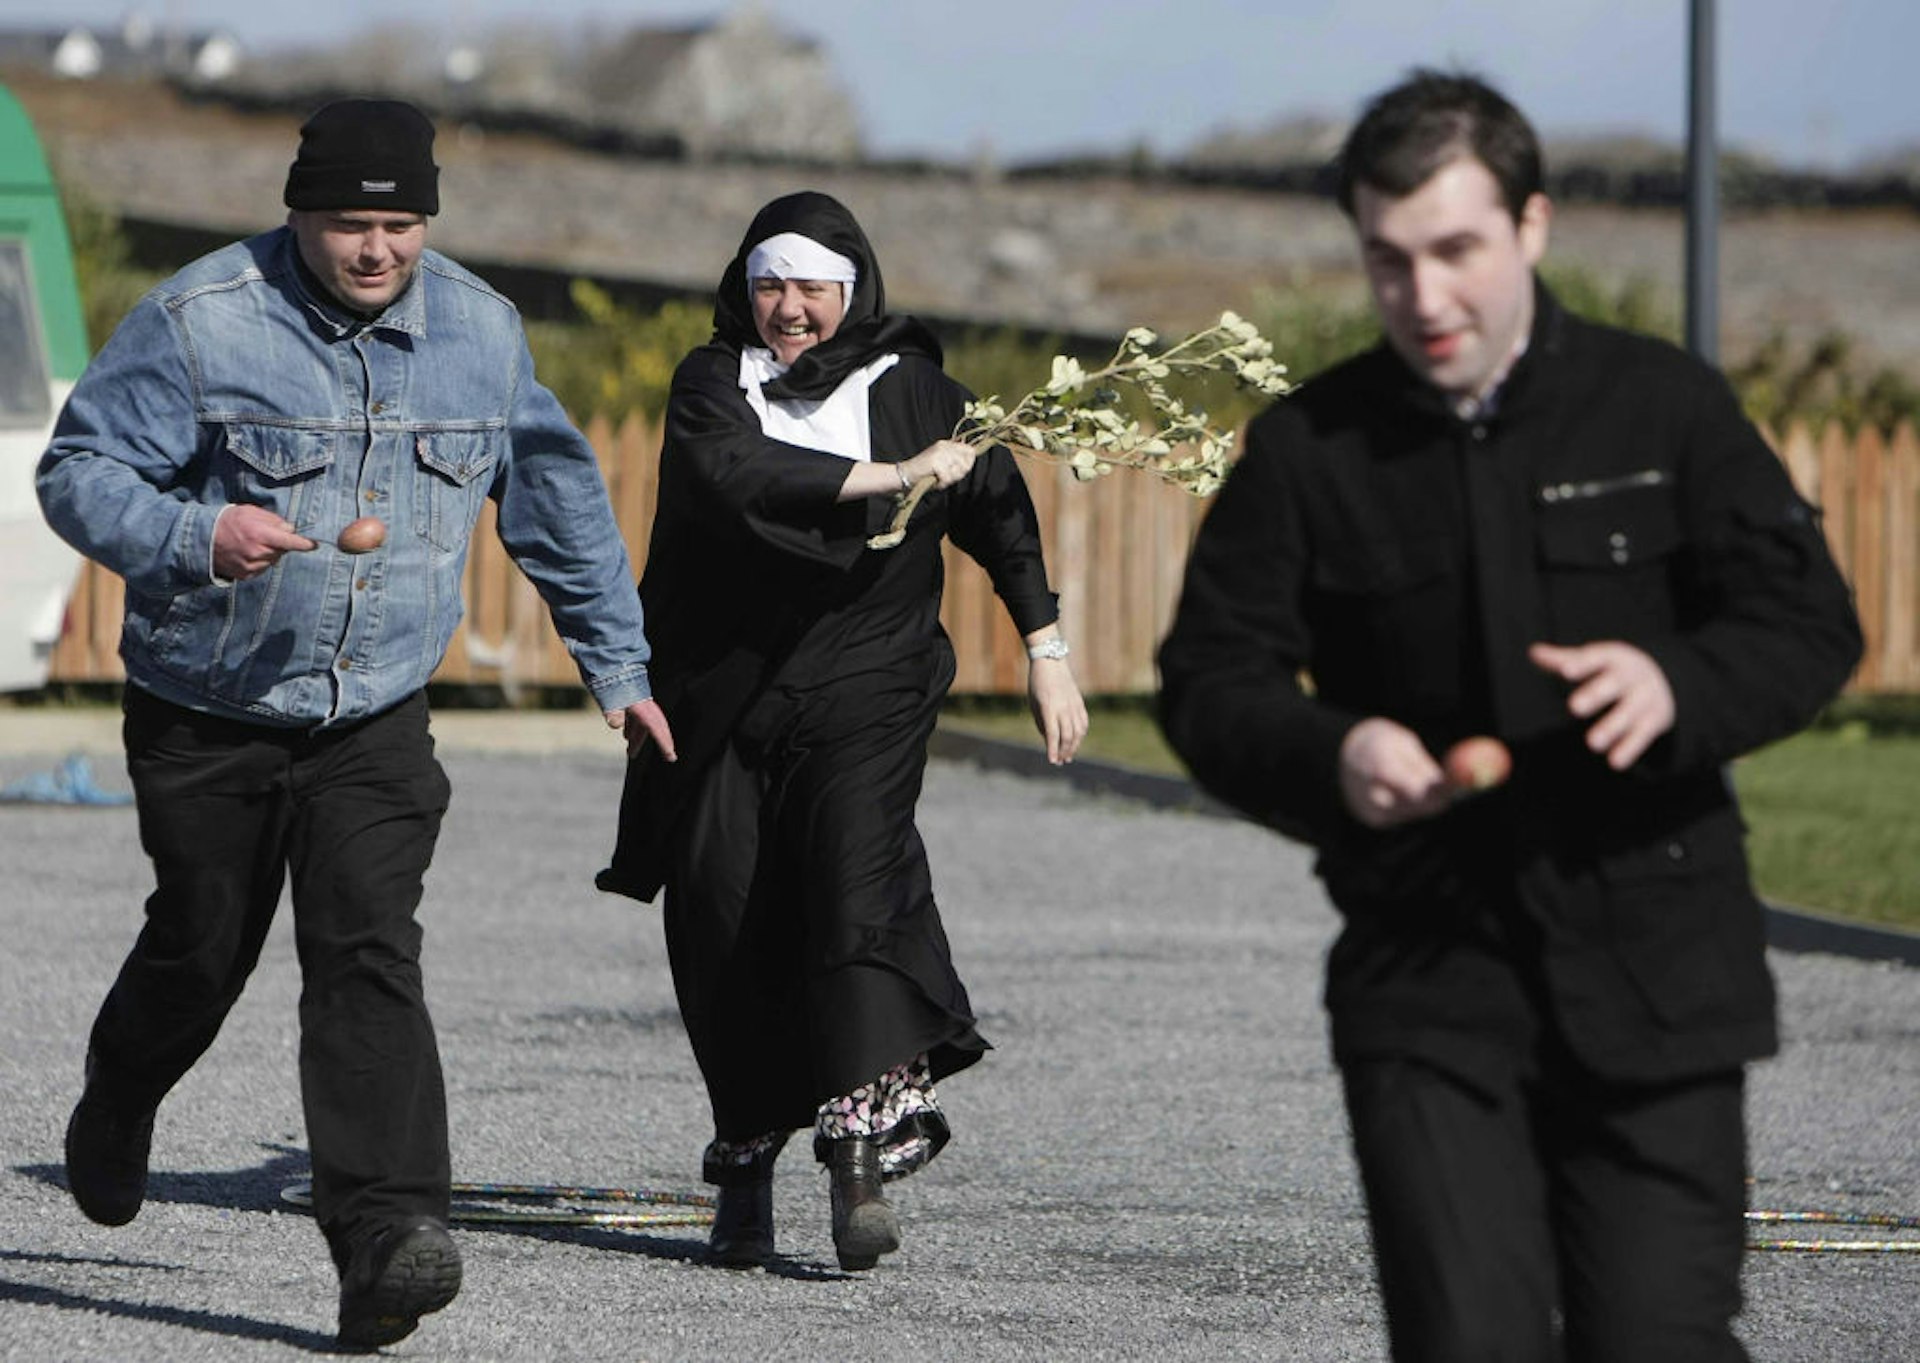 A woman dressed as a nun waves a stick behind two men in an egg and spoon race.